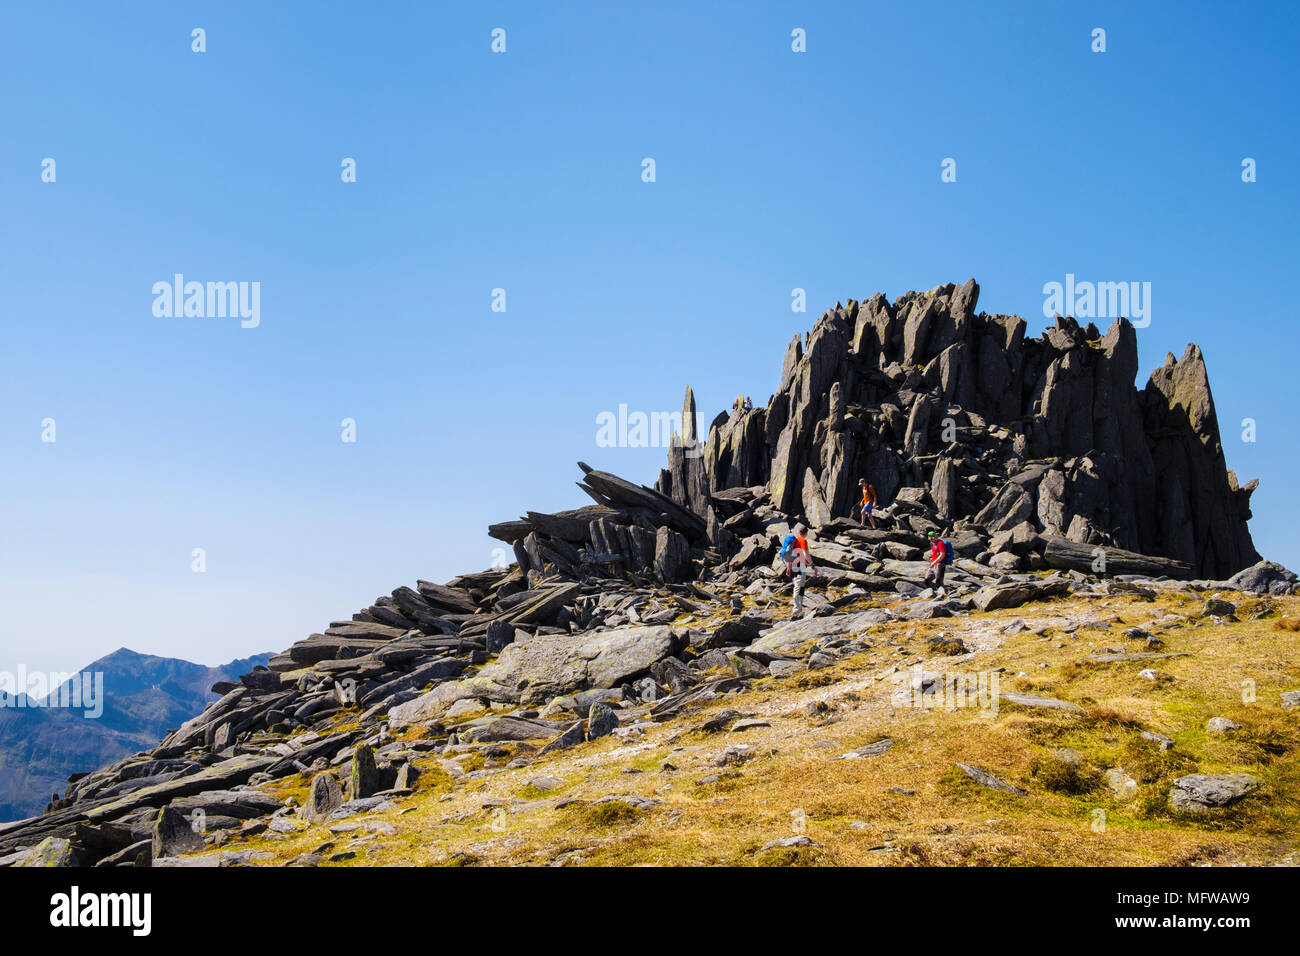 Castell y Gwynt (Castle of the Winds) on Glyder Fach mountain with hikers scrambling down the rocks in Snowdonia National Park. Wales, UK, Britain Stock Photo